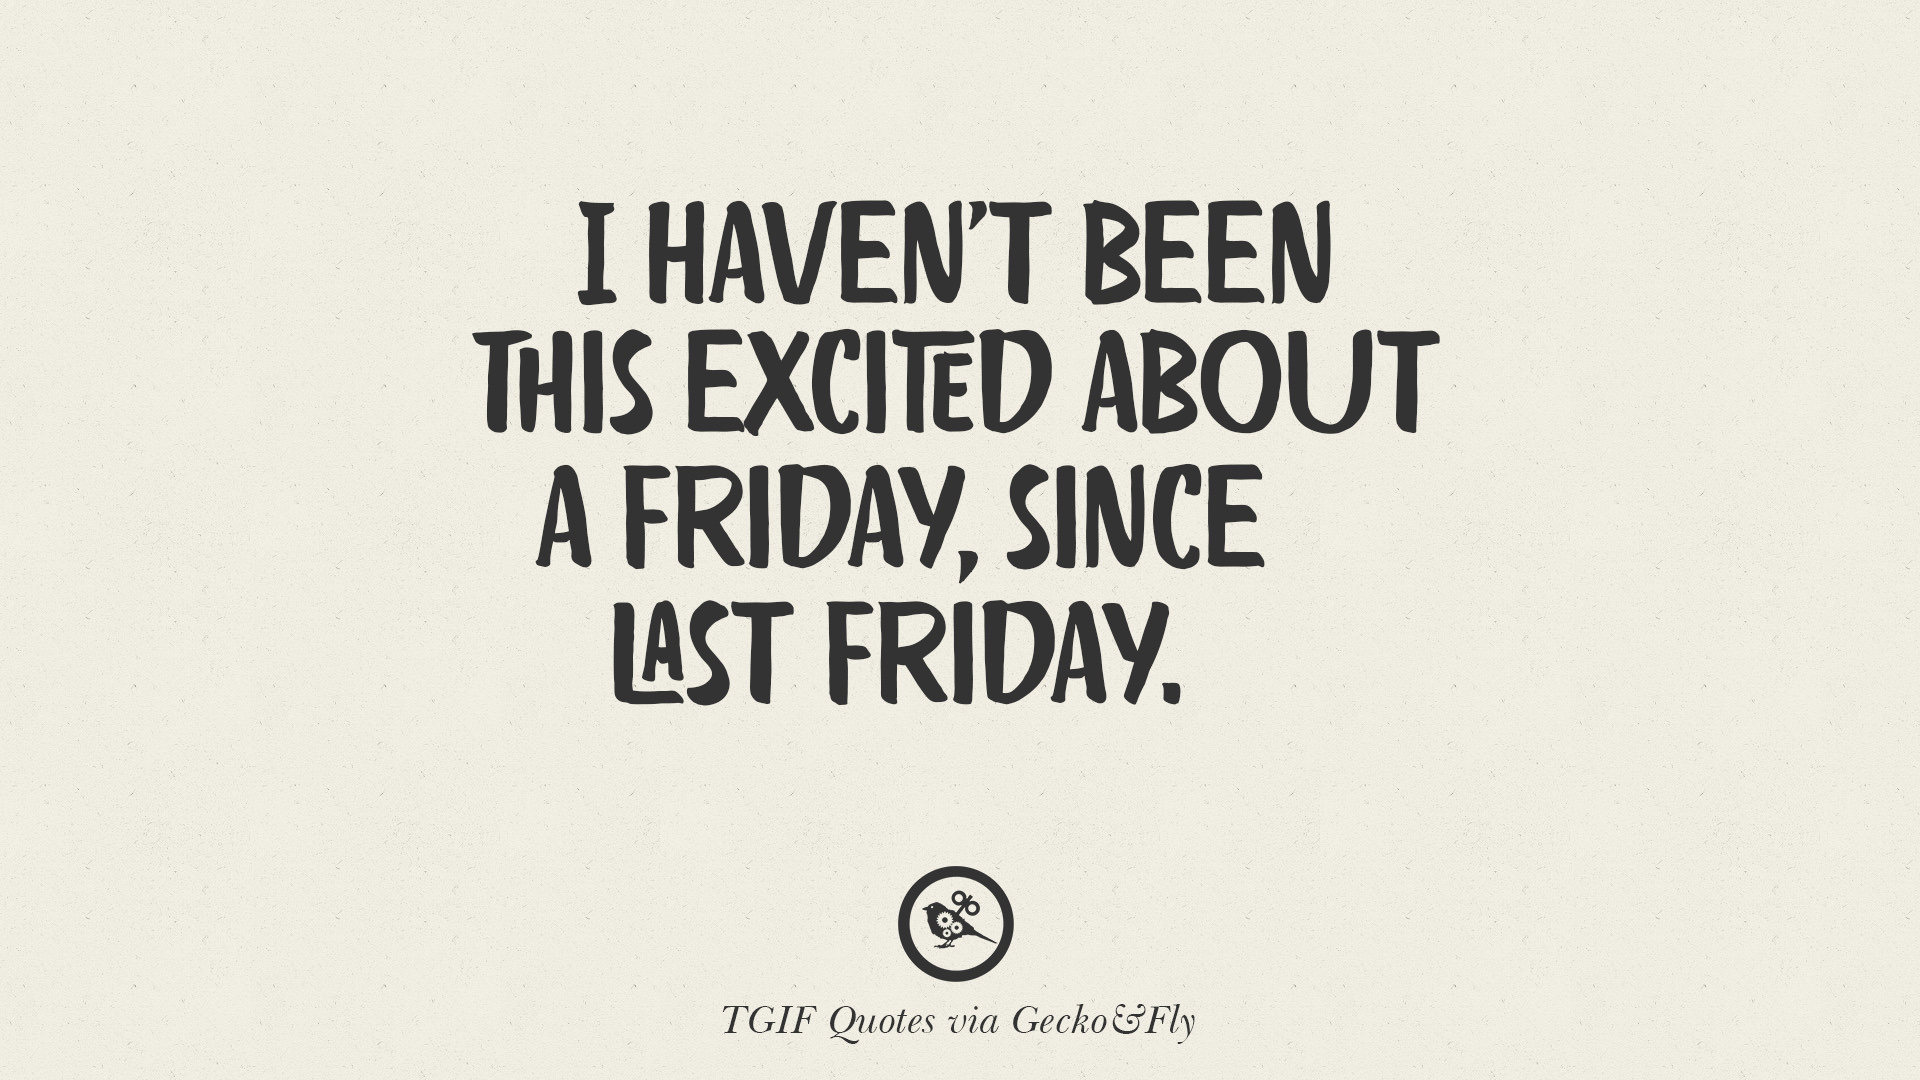 20 TGIF [ Thank God It's Friday ] Meme Quotes & Messages